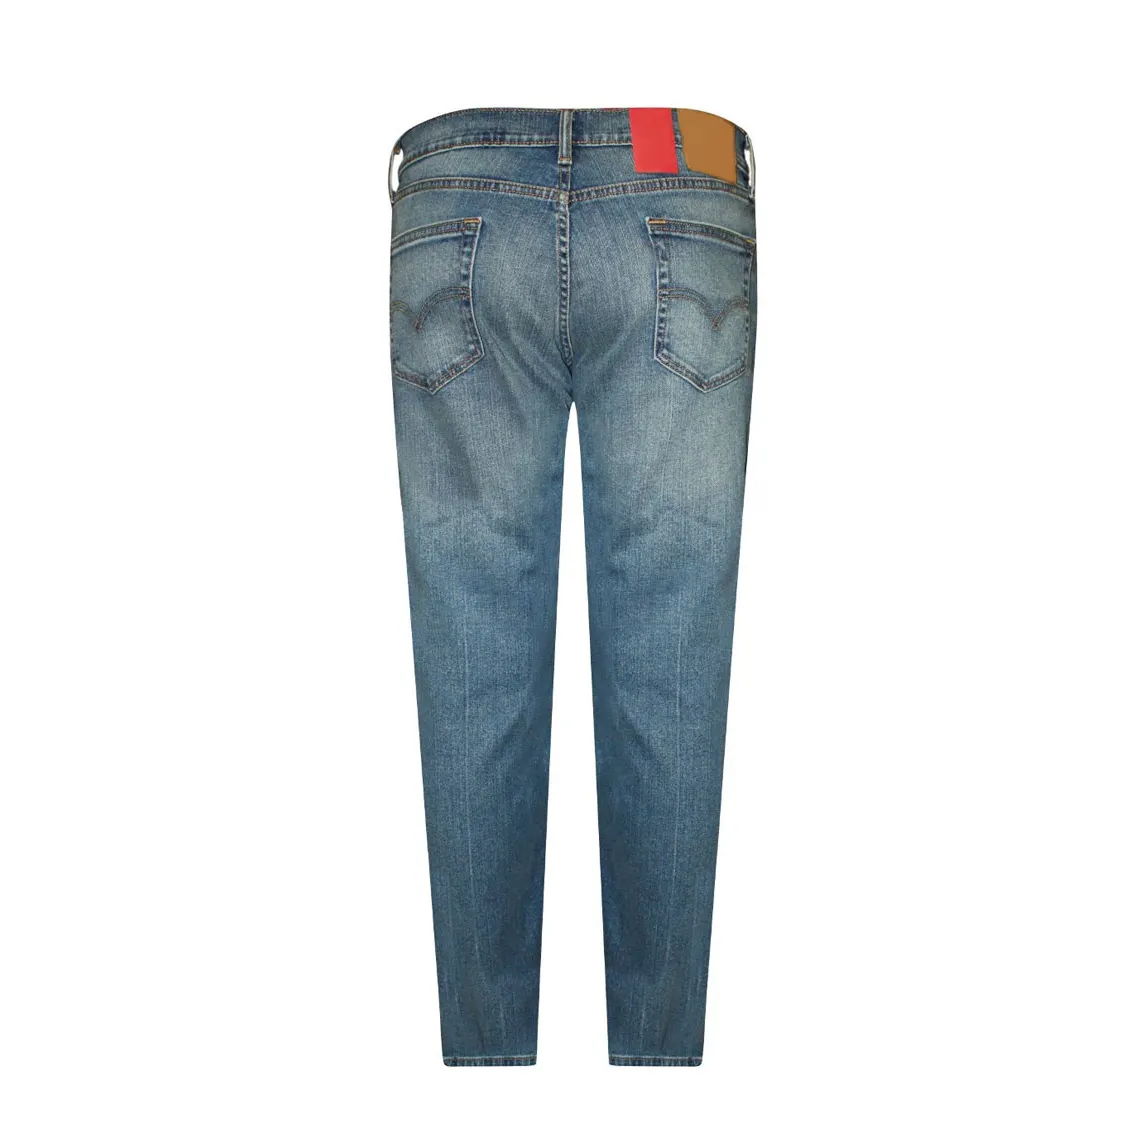 Professional top manufacture best quality jeans Comfortable size Fashion wear Jeans at low rate